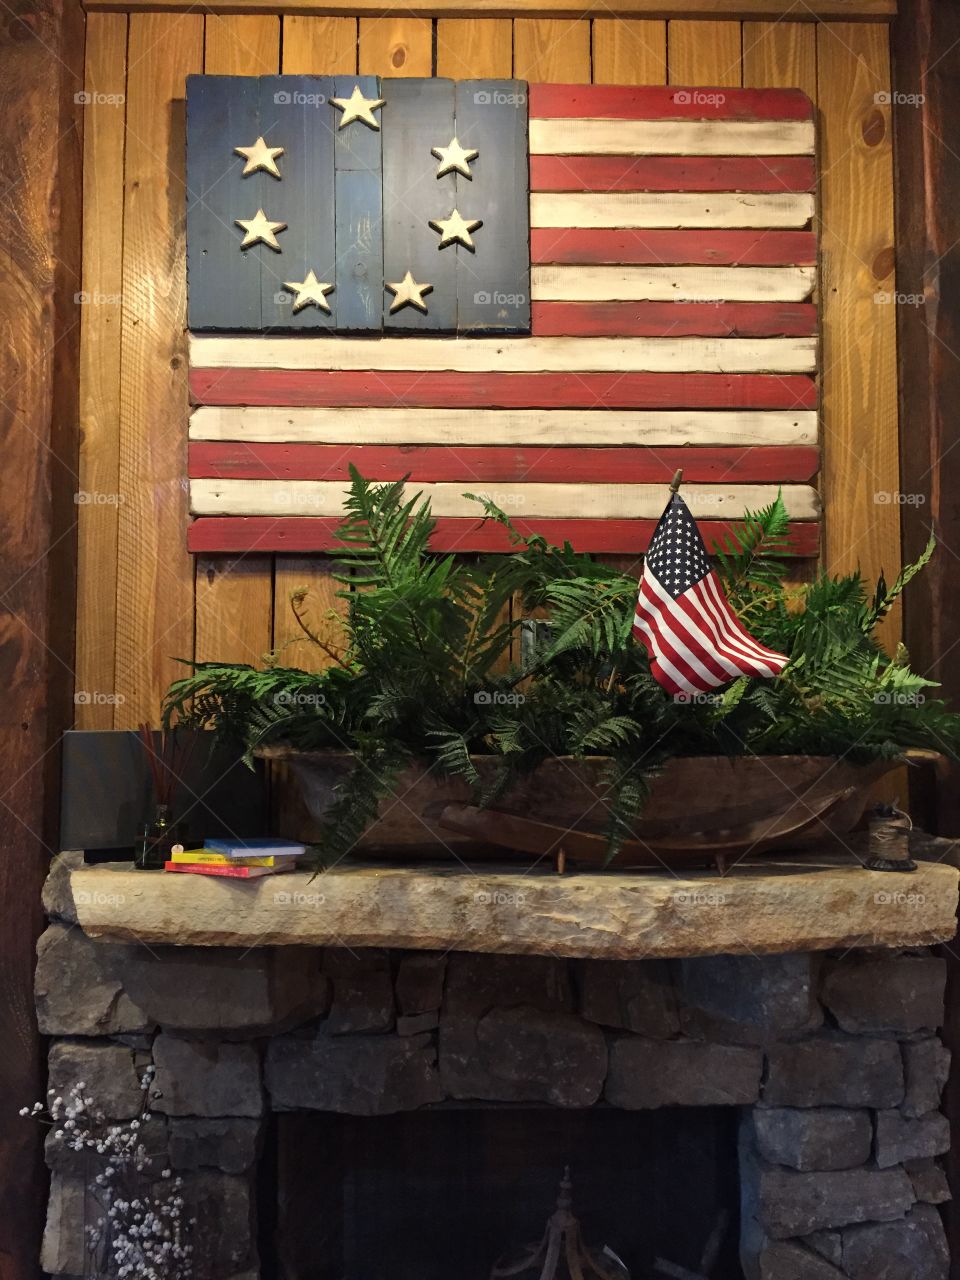 Flag and mantle display